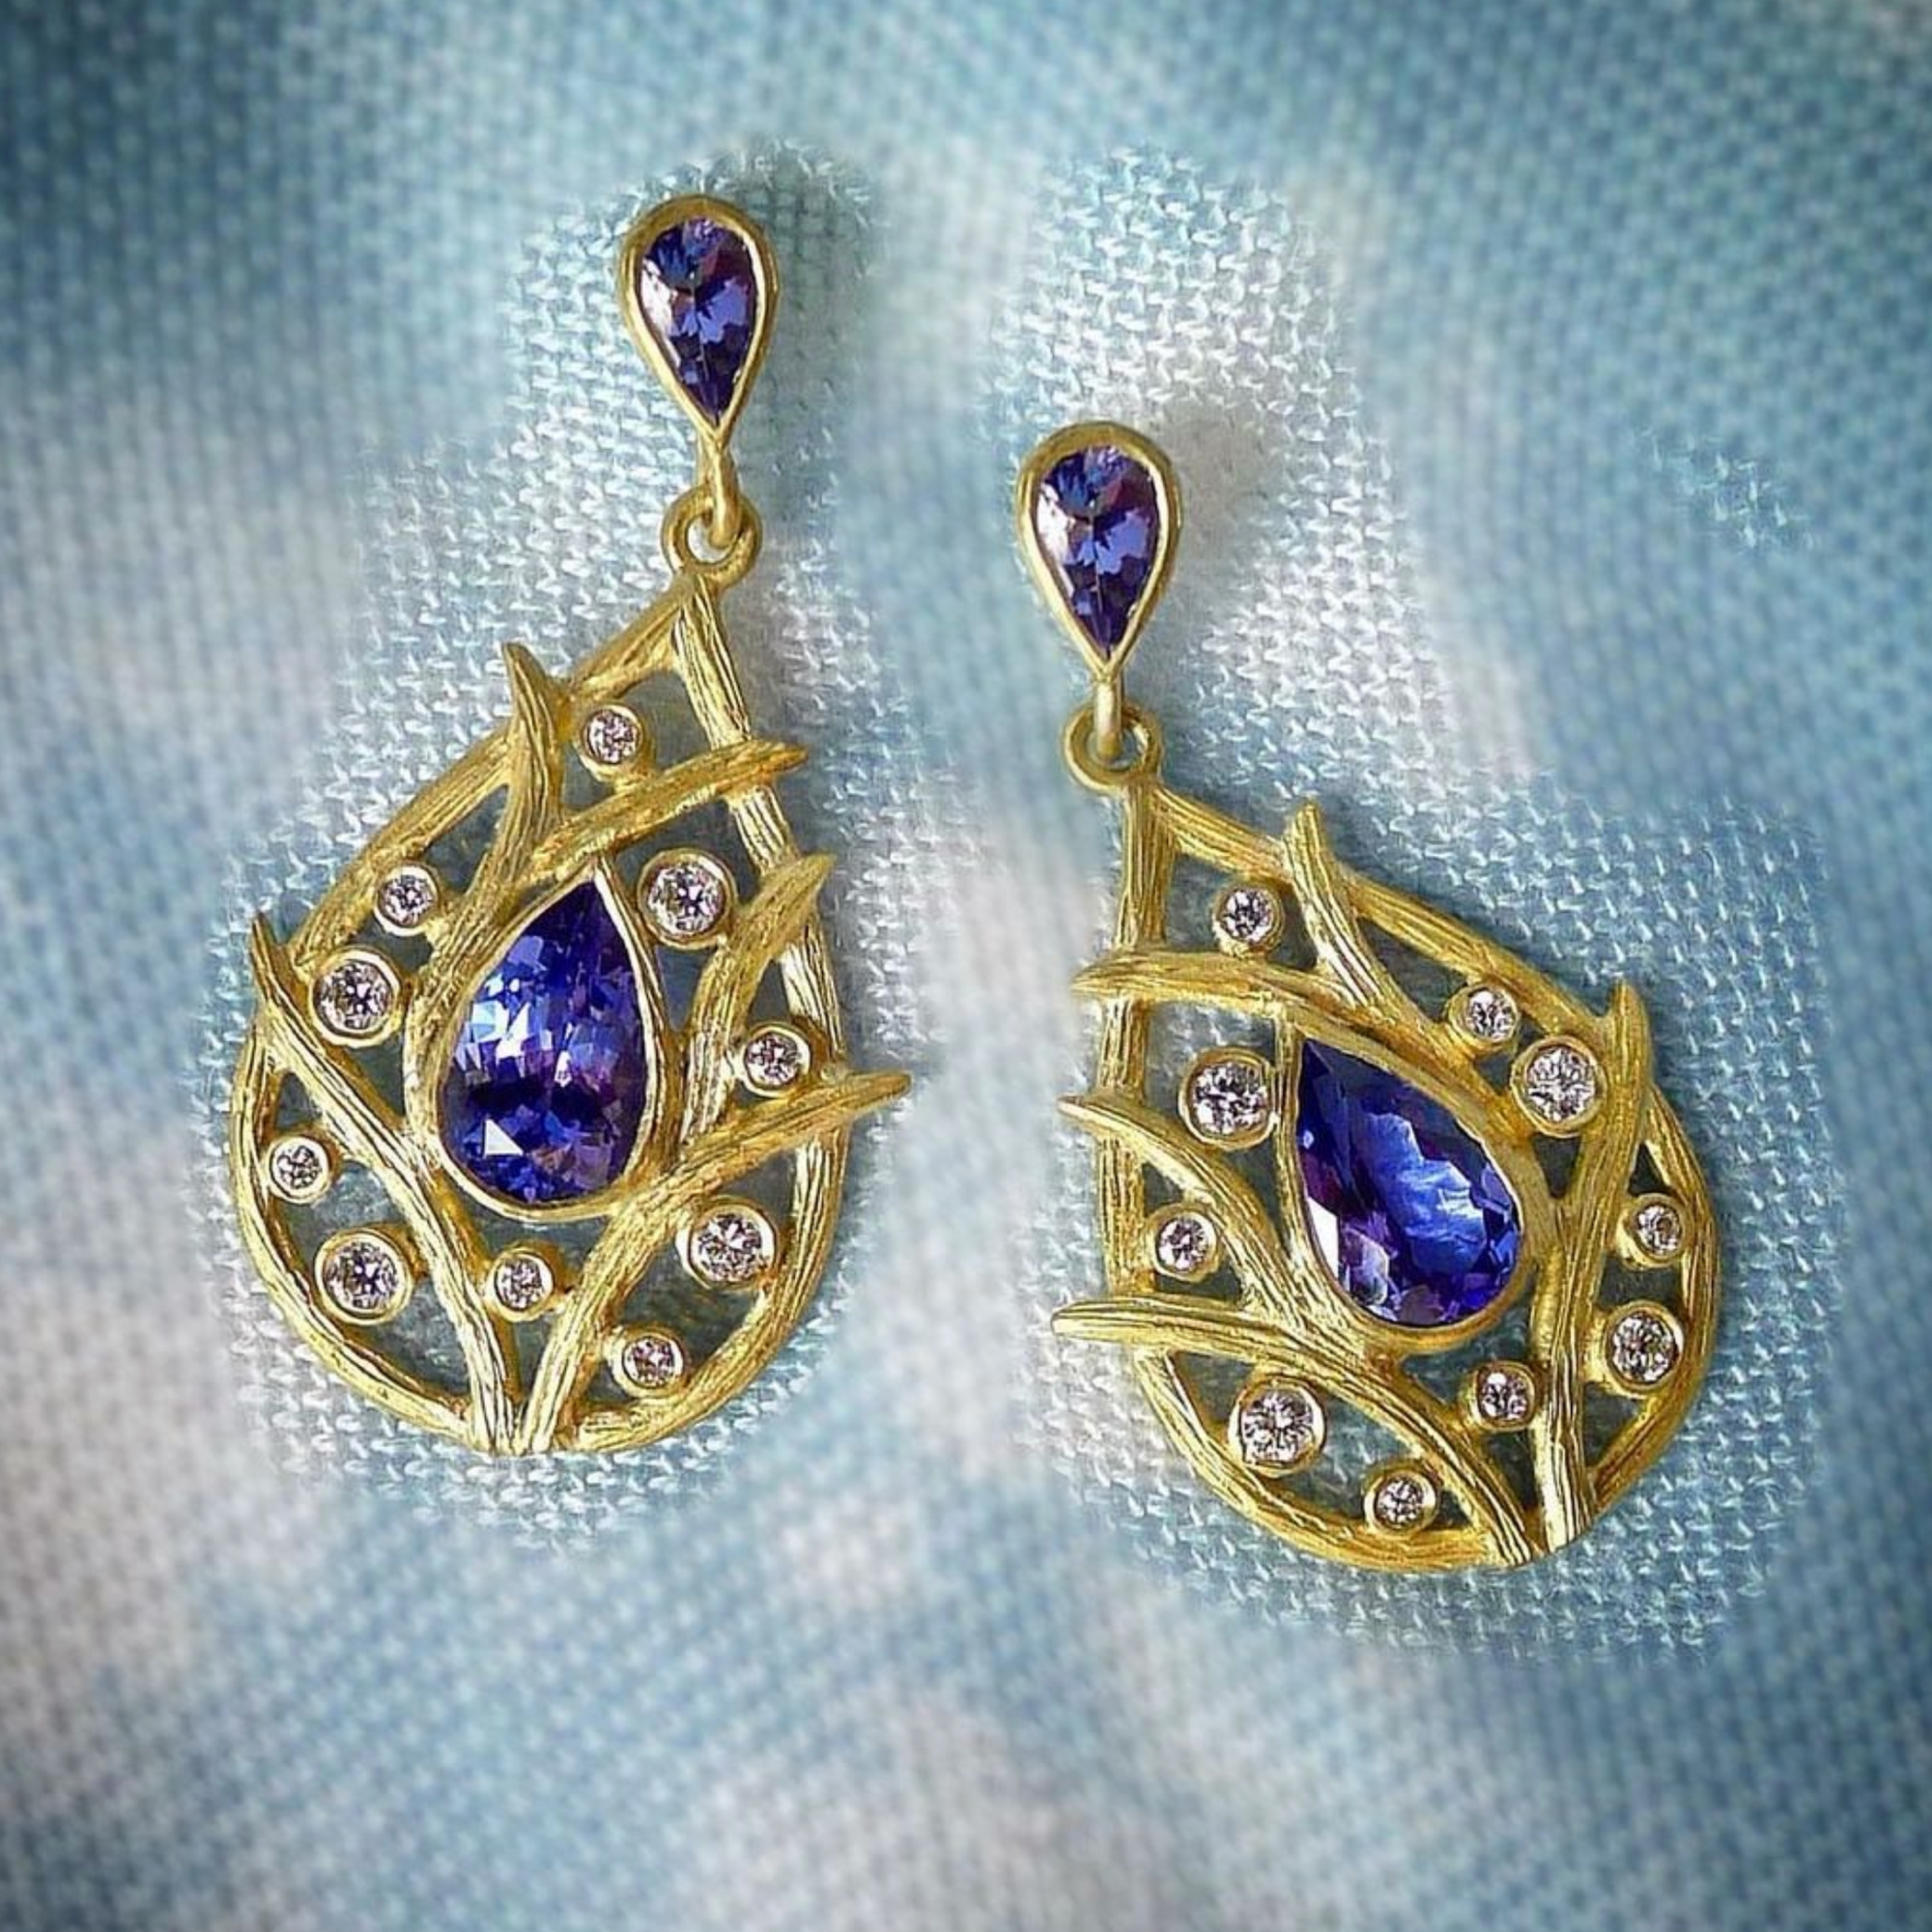 Vine Tanzanite Earrings by Laurie Kaiser available at Talisman Collection Fine Jewelers in El Dorado Hills, CA and online. Featuring pear-cut faceted tanzanites surrounded by 18k yellow gold vines and accented with 0.31 cts of white brilliant diamonds, these earrings are sure to make a statement. The secure post backs ensure comfortable and worry-free wear. You'll cherish these stunners for years to come.